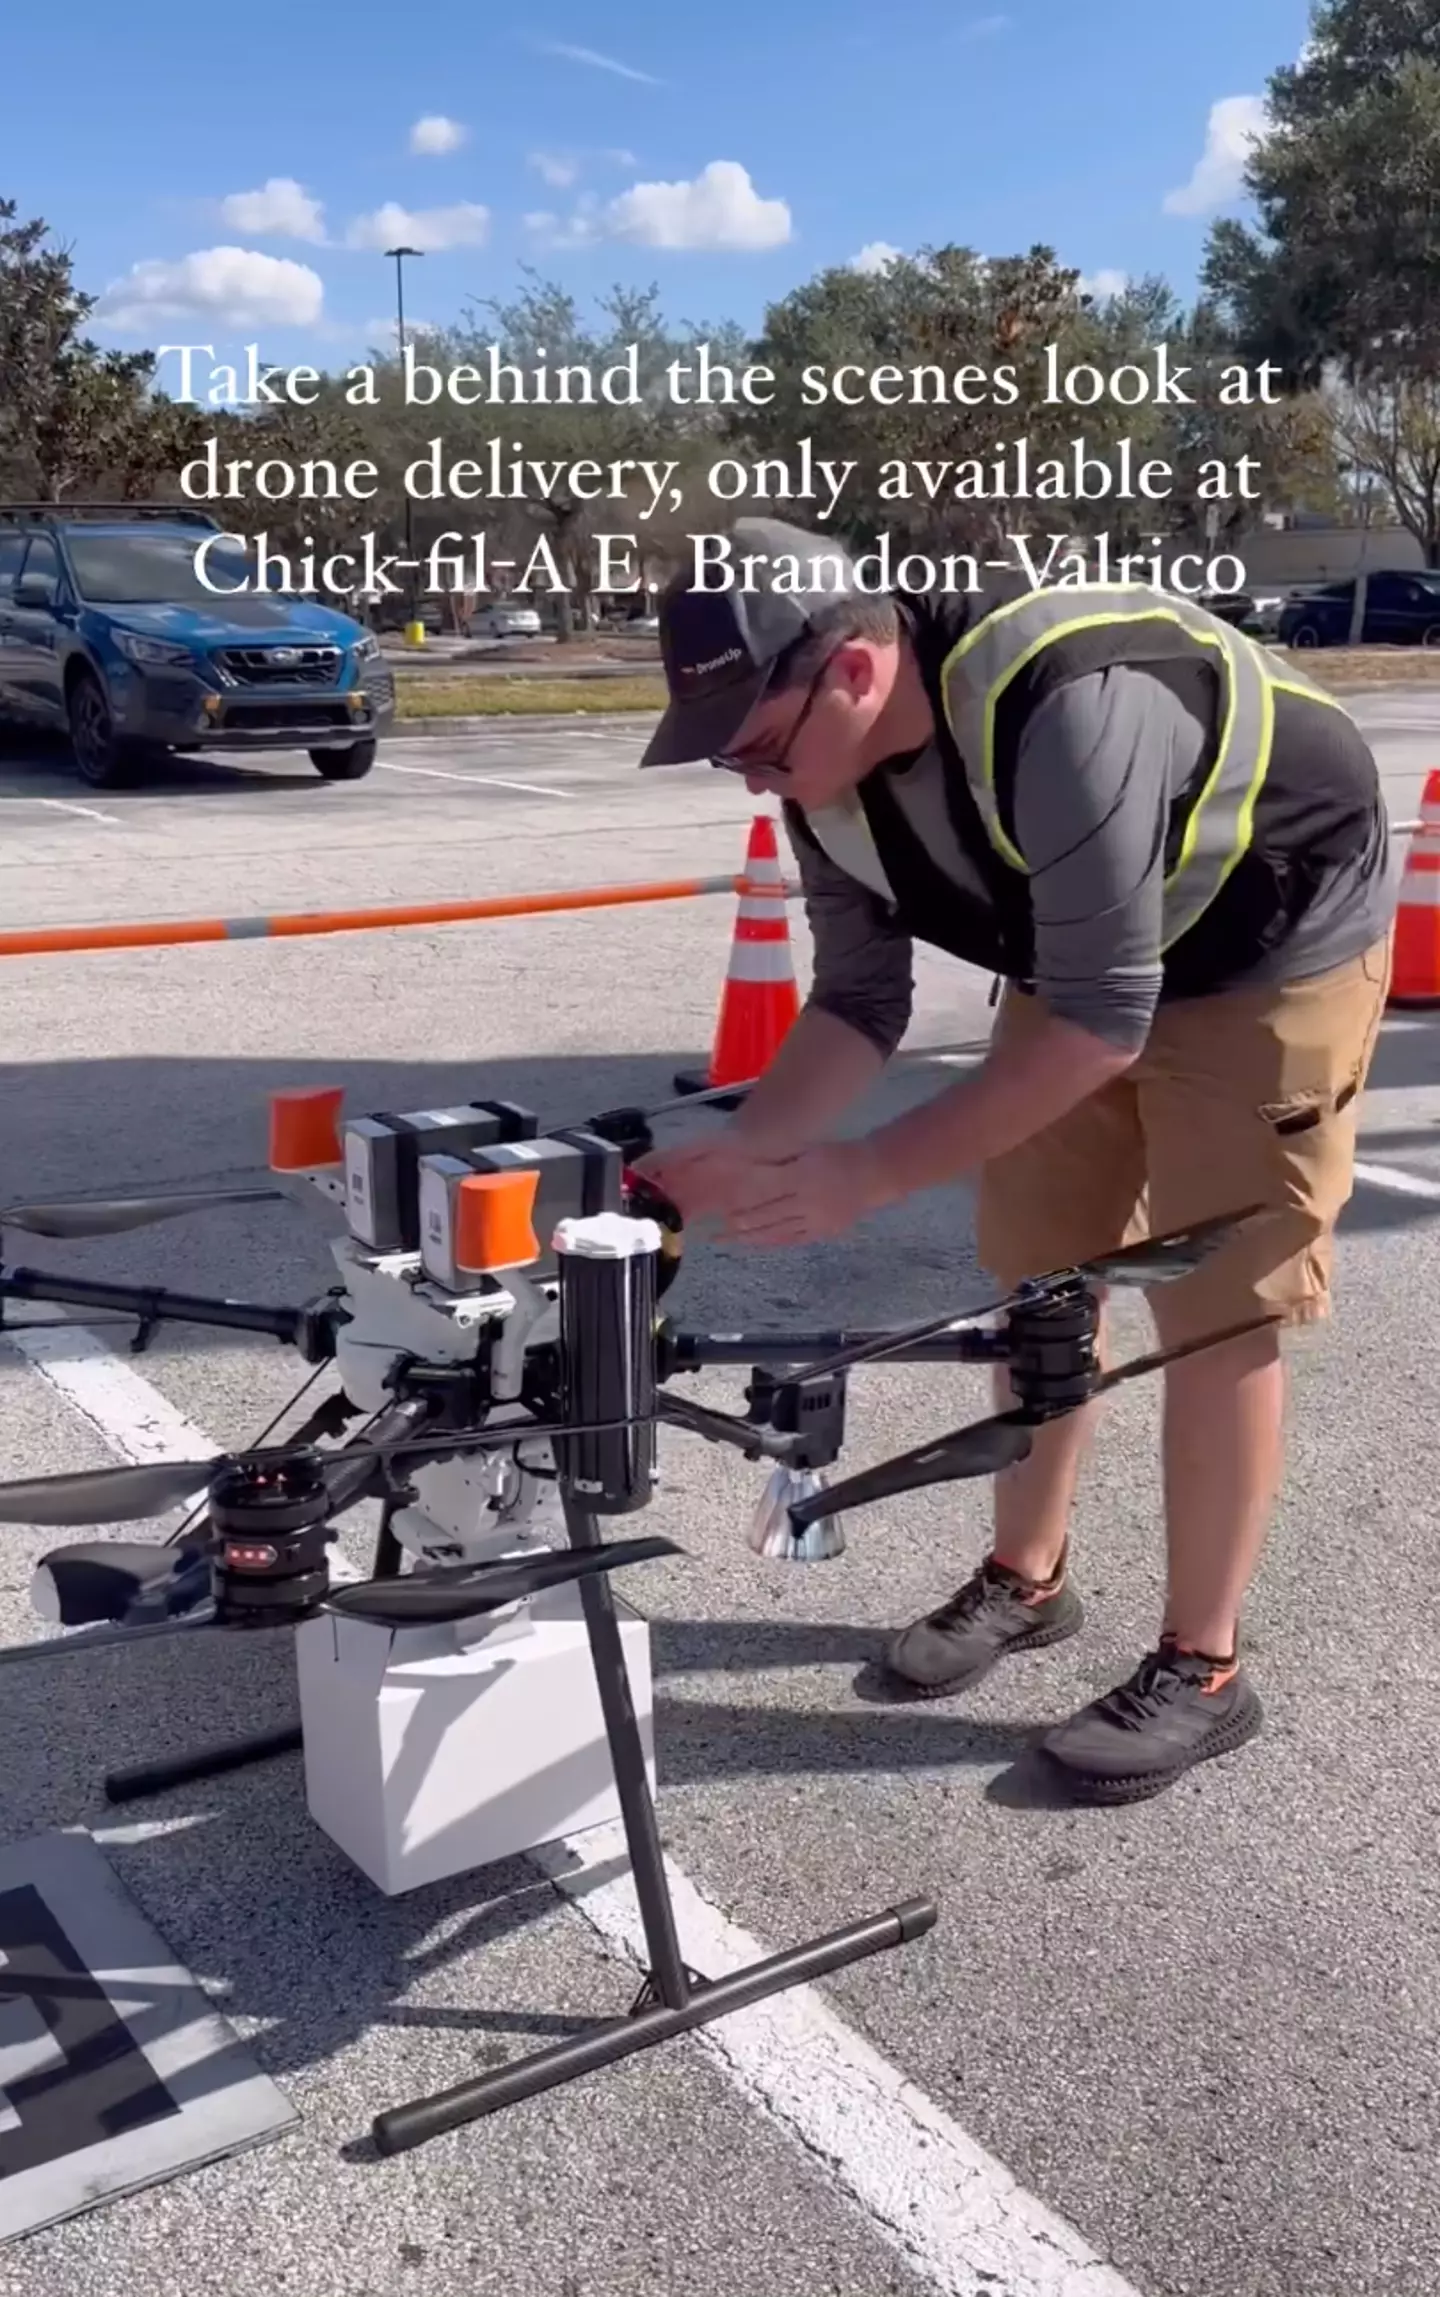 The fast food chain has partnered with DroneUp to offer the drone delivery service.